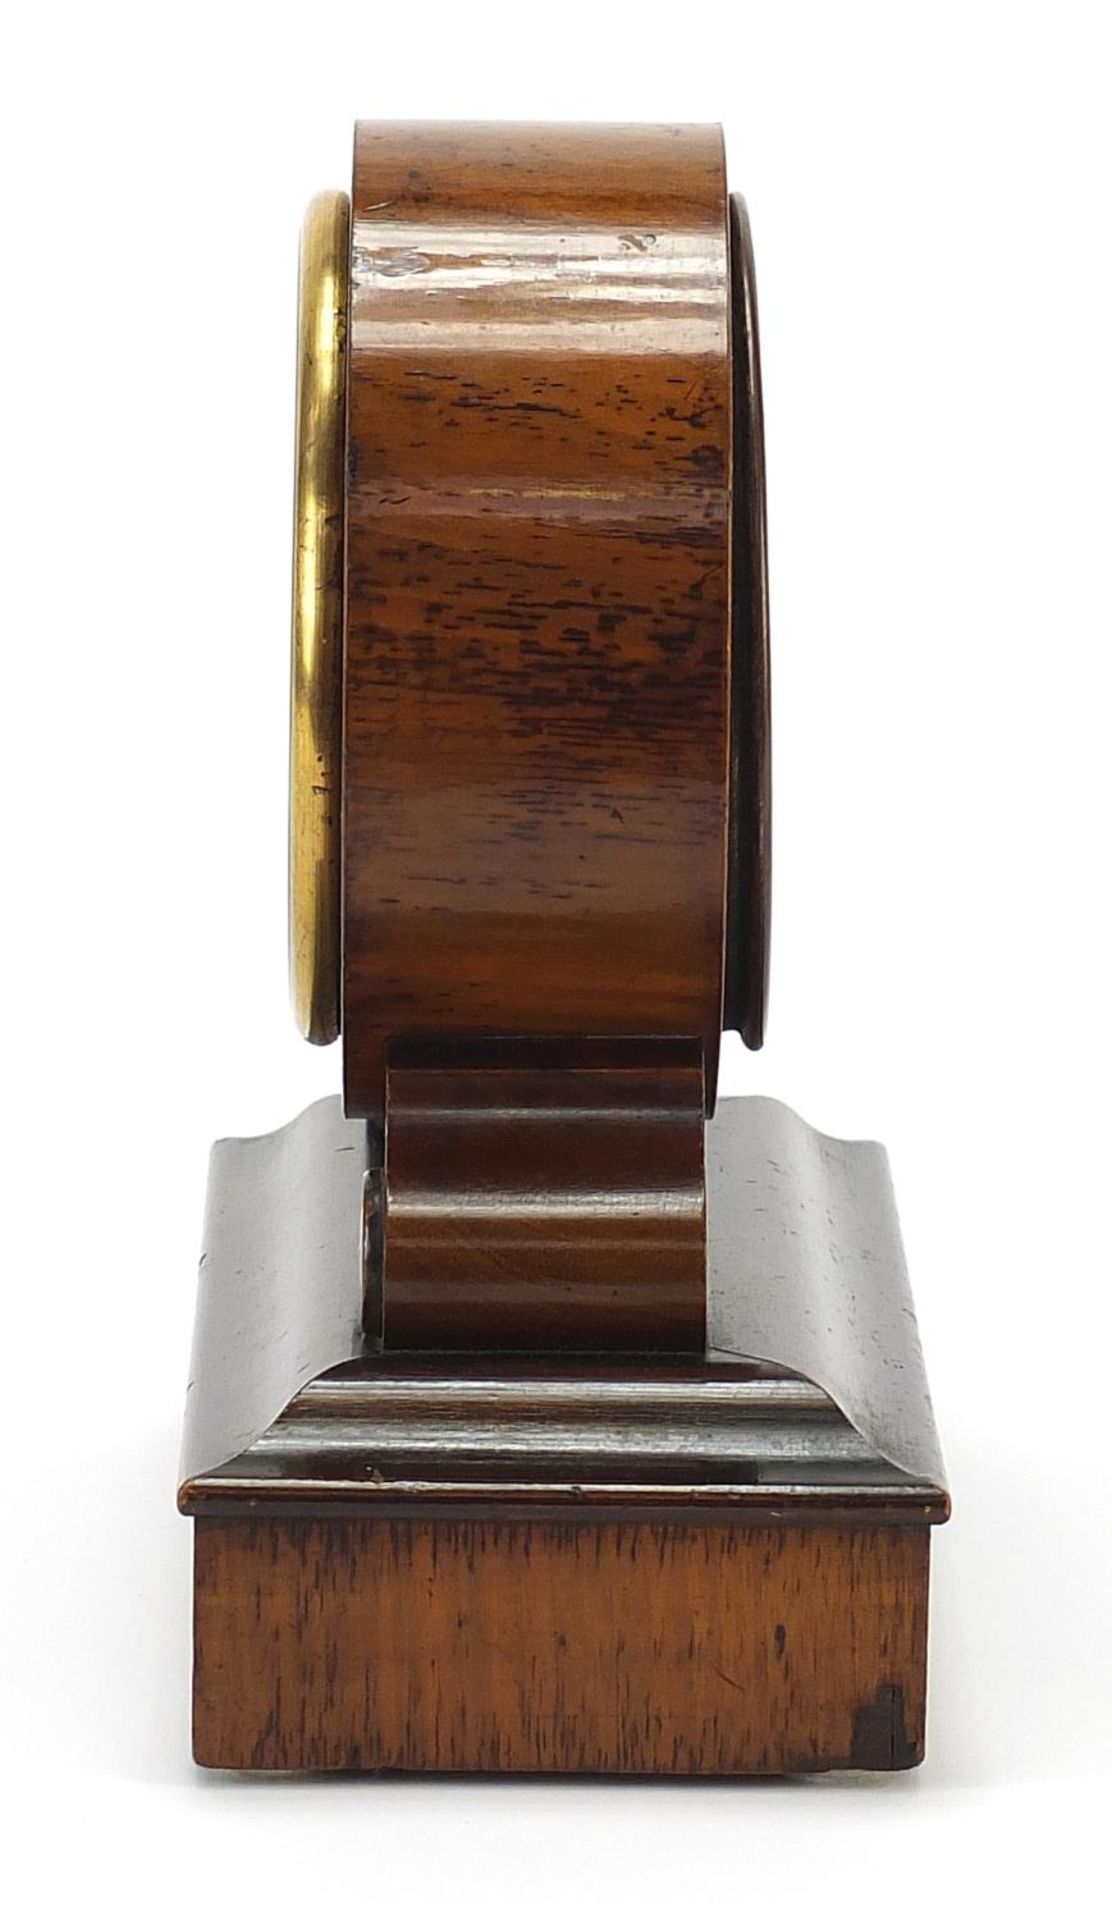 19th century walnut mantle clock with Roman numerals, the movement impressed V.A.P Brevete, 22.5cm - Image 3 of 7